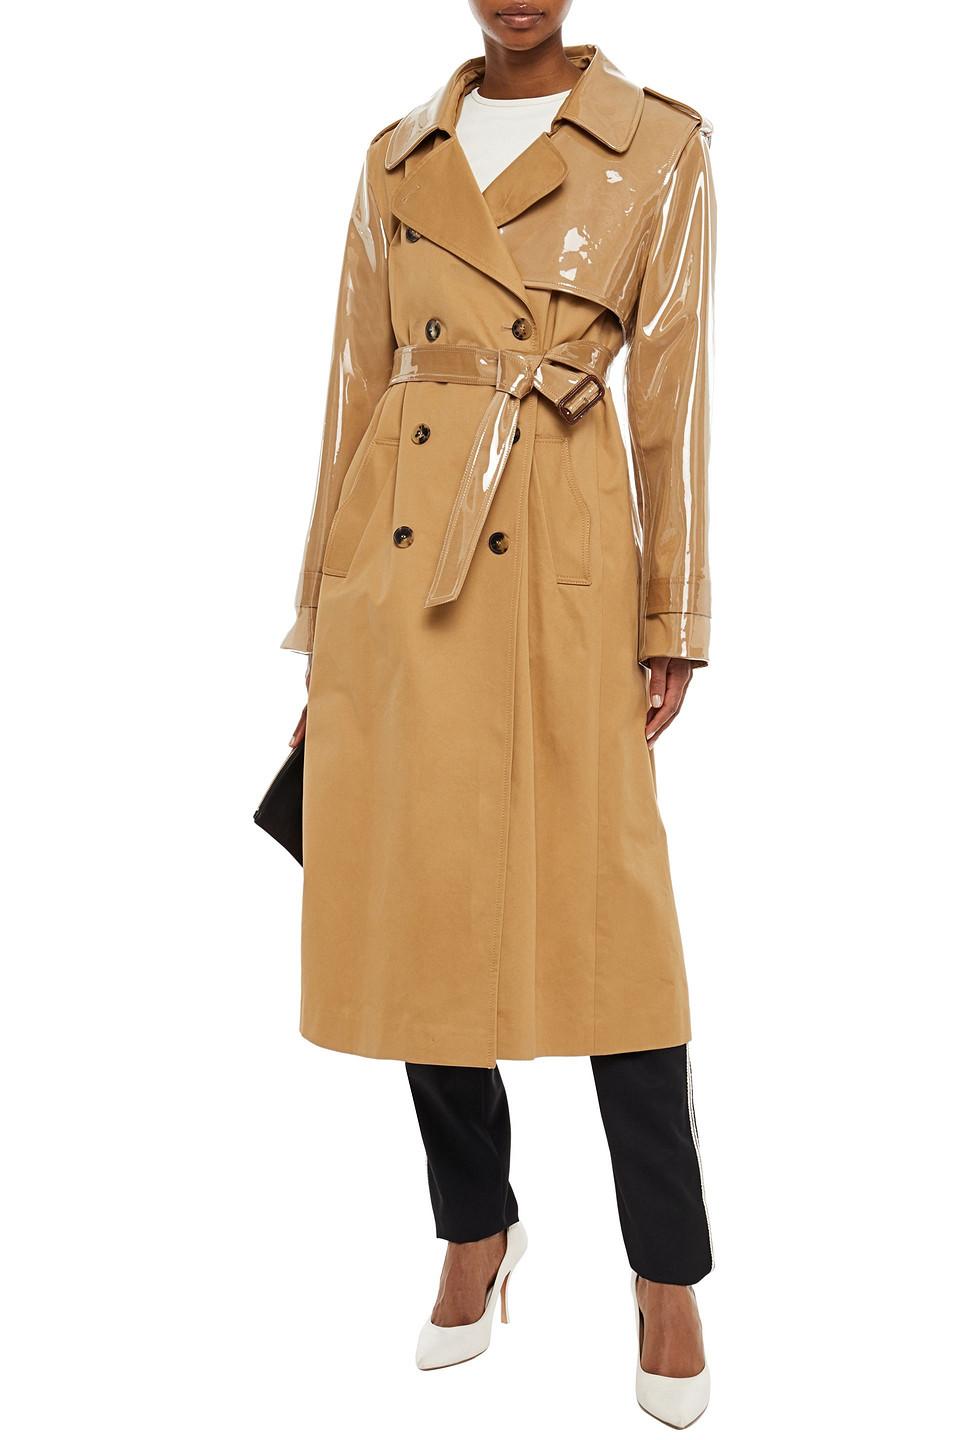 Paco Rabanne Layered Pvc And Cotton-gabardine Trench Coat in